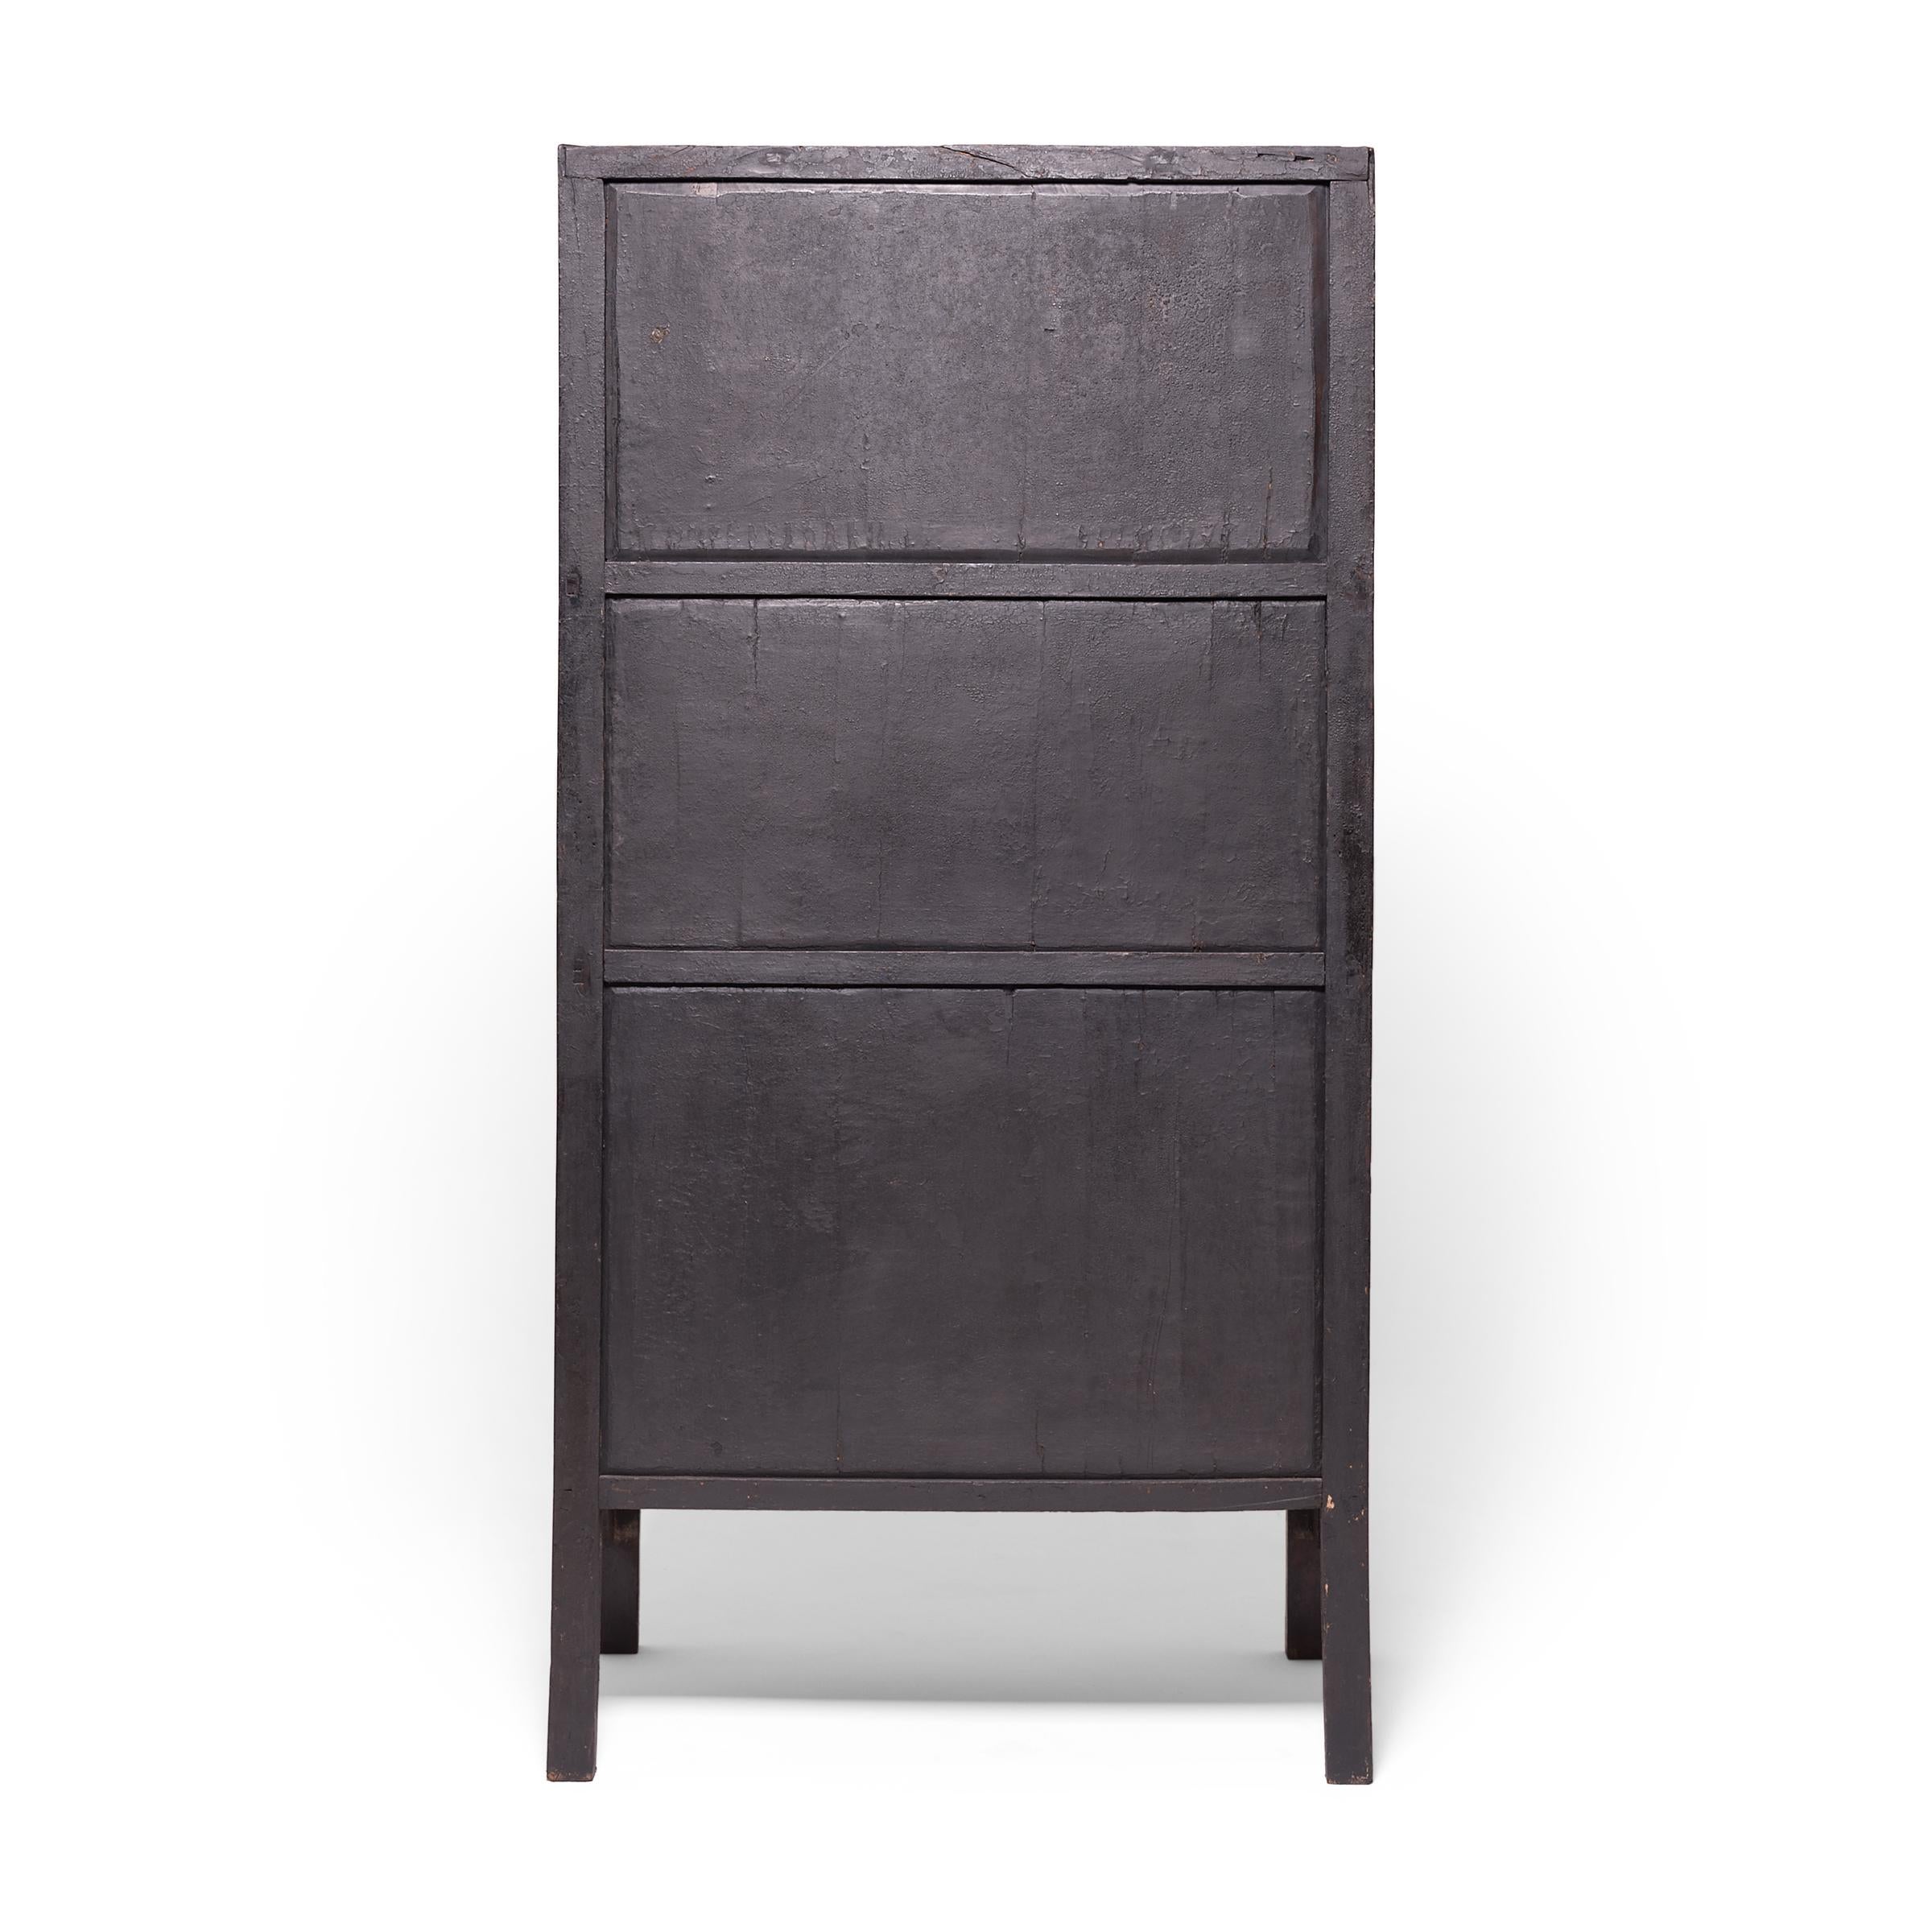 Qing Chinese Triple Bat Book Cabinet, c. 1850 For Sale